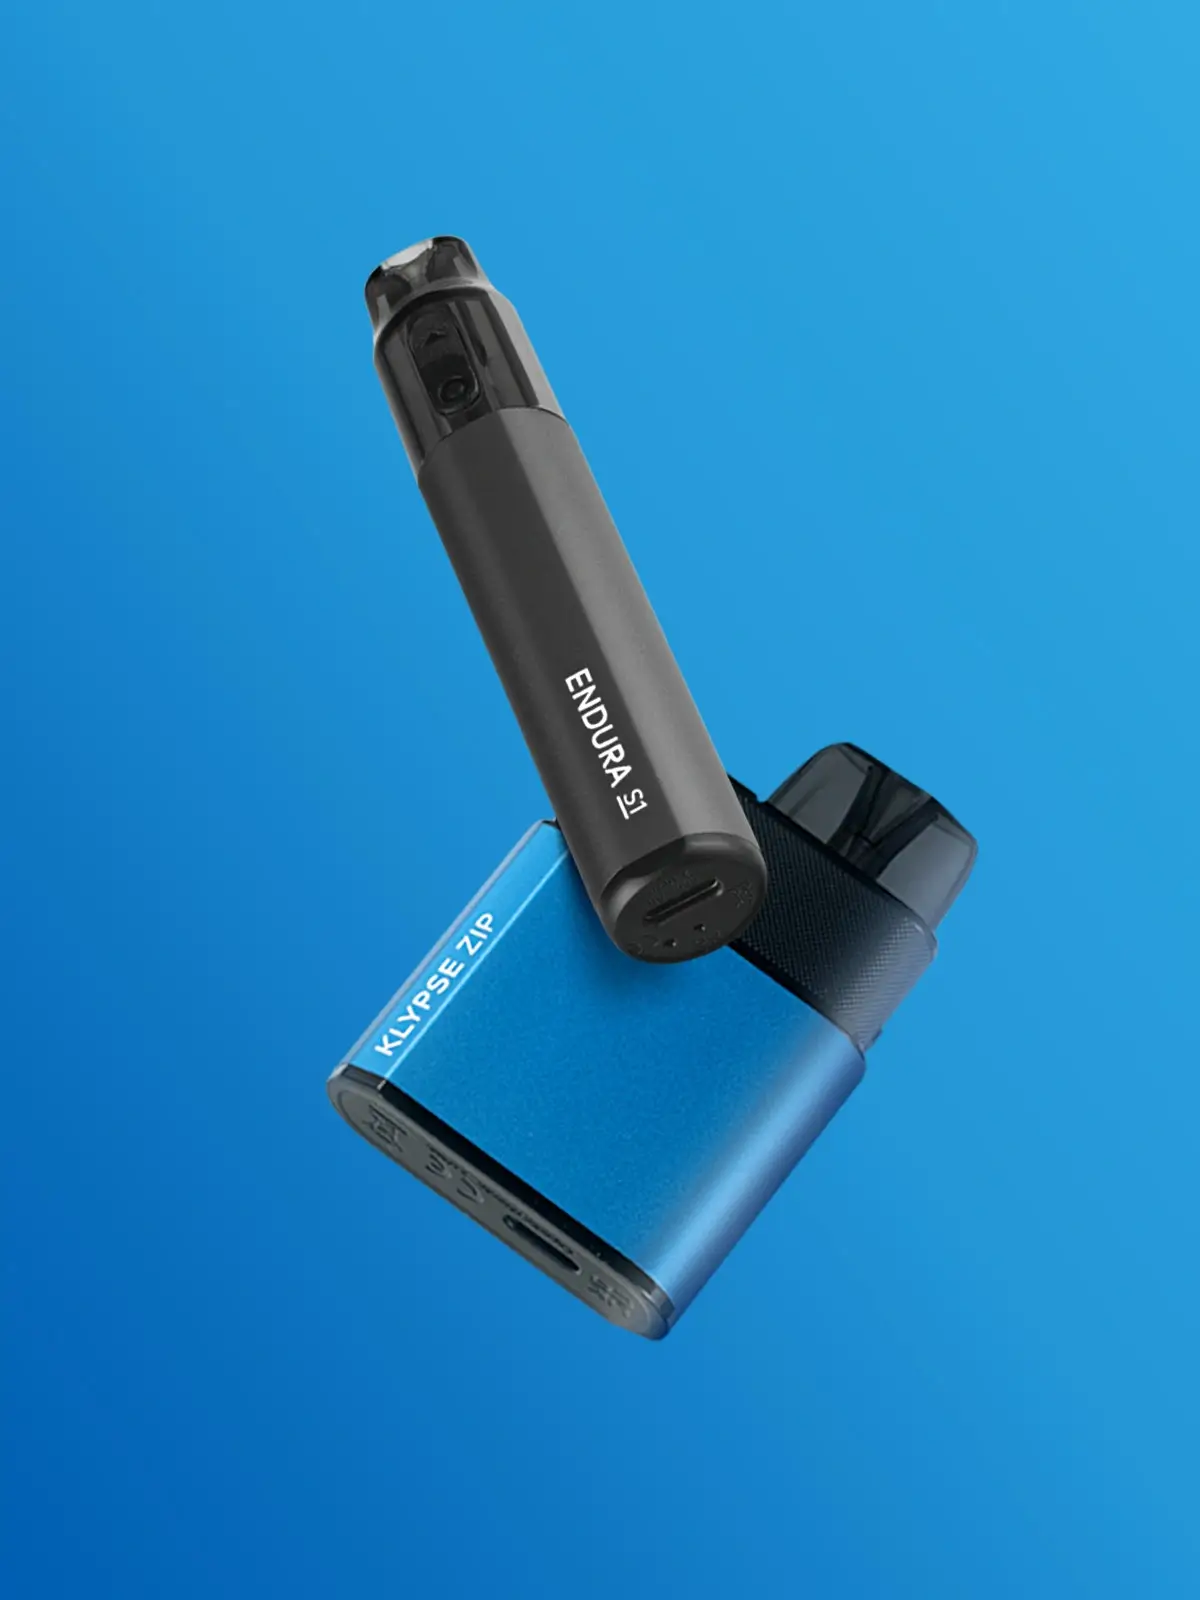 A black Innokin Endura S1 and a blue Innokin Klypse Zip floating in front of a blue background